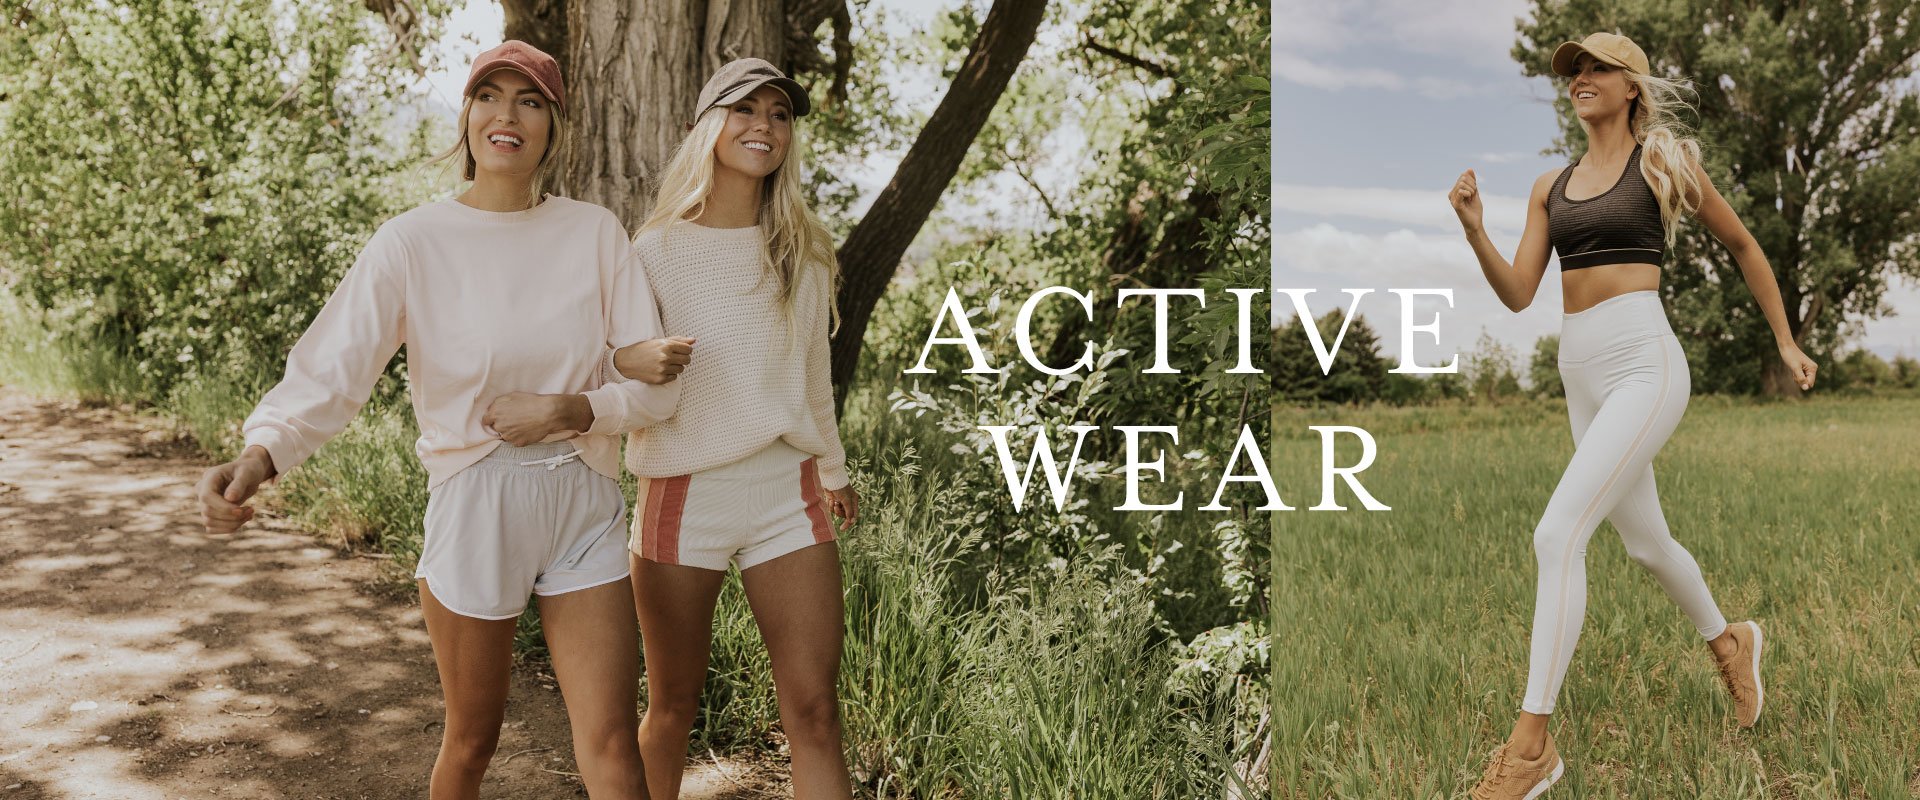 business plan about activewear